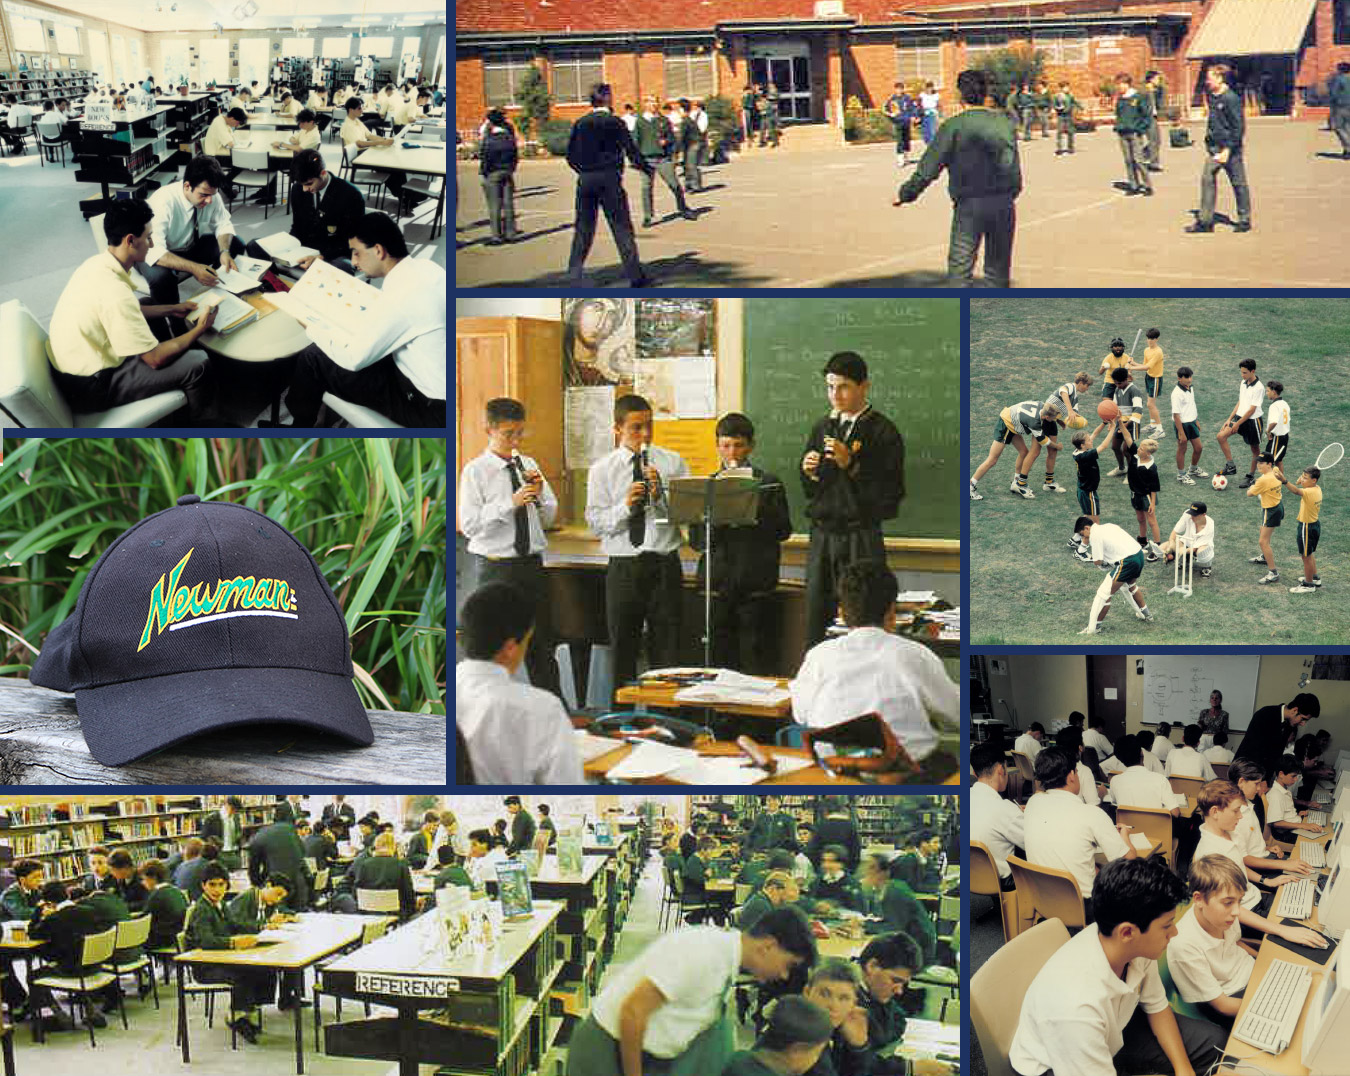 Archive photos of Newman College Greystanes